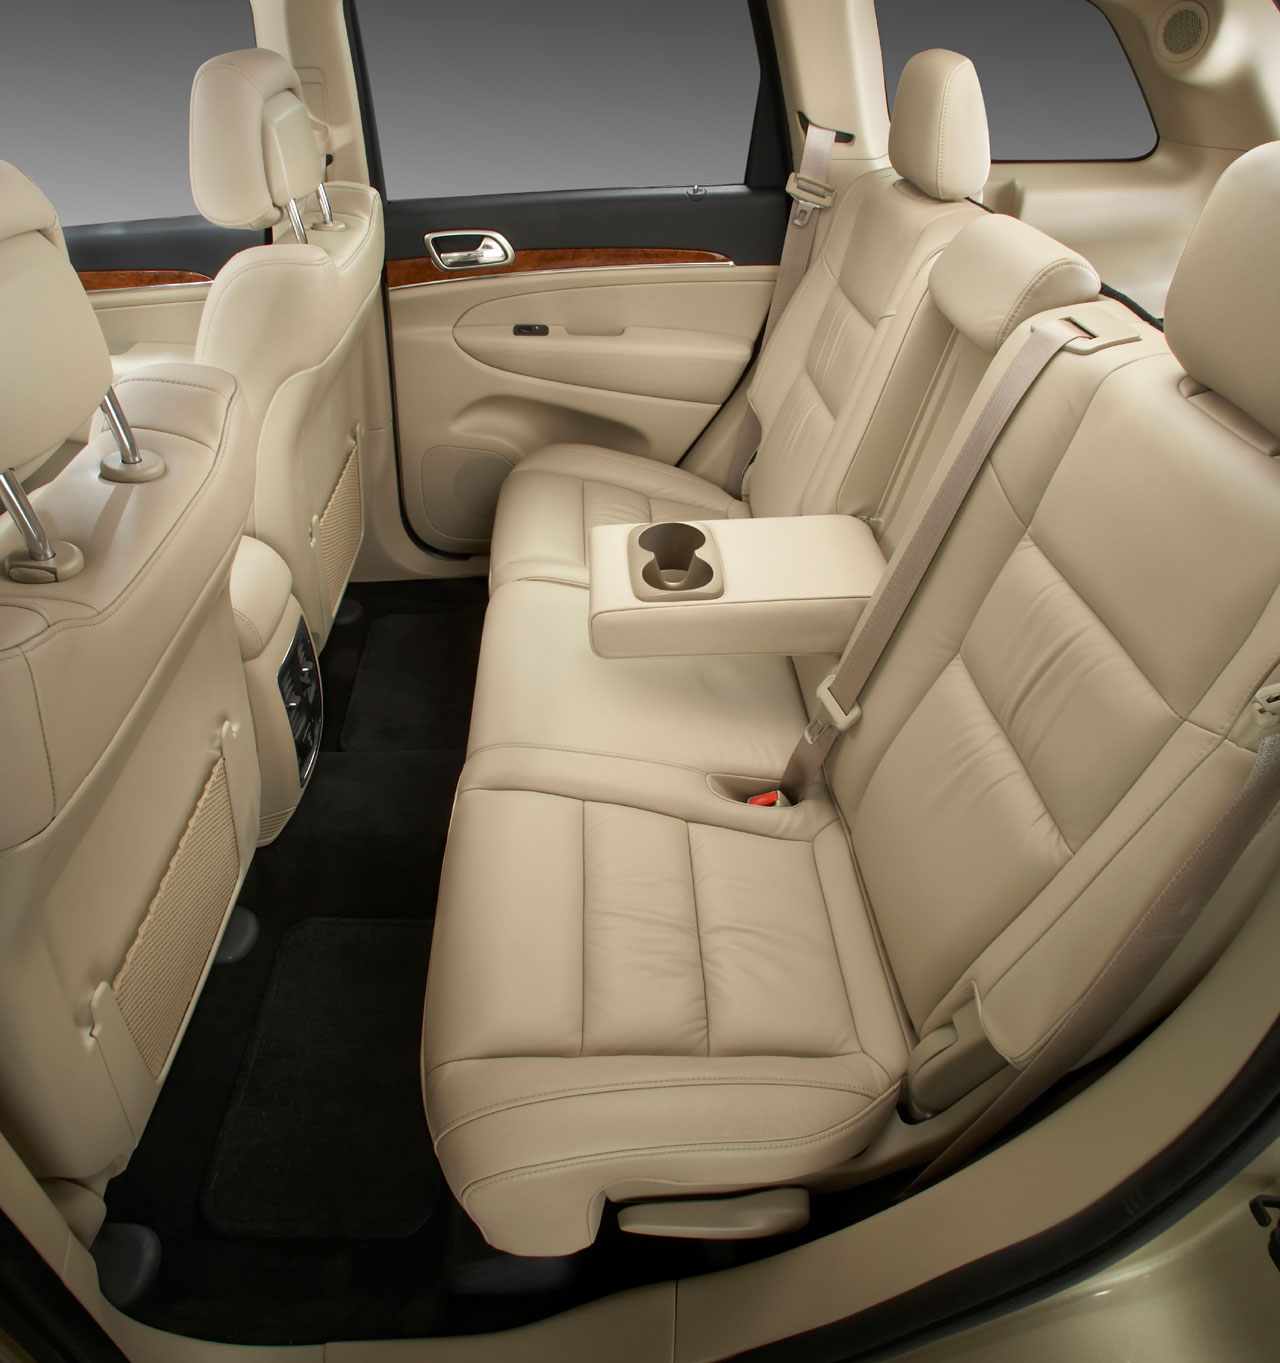 Jeep grand cherokee back seat dimensions #2